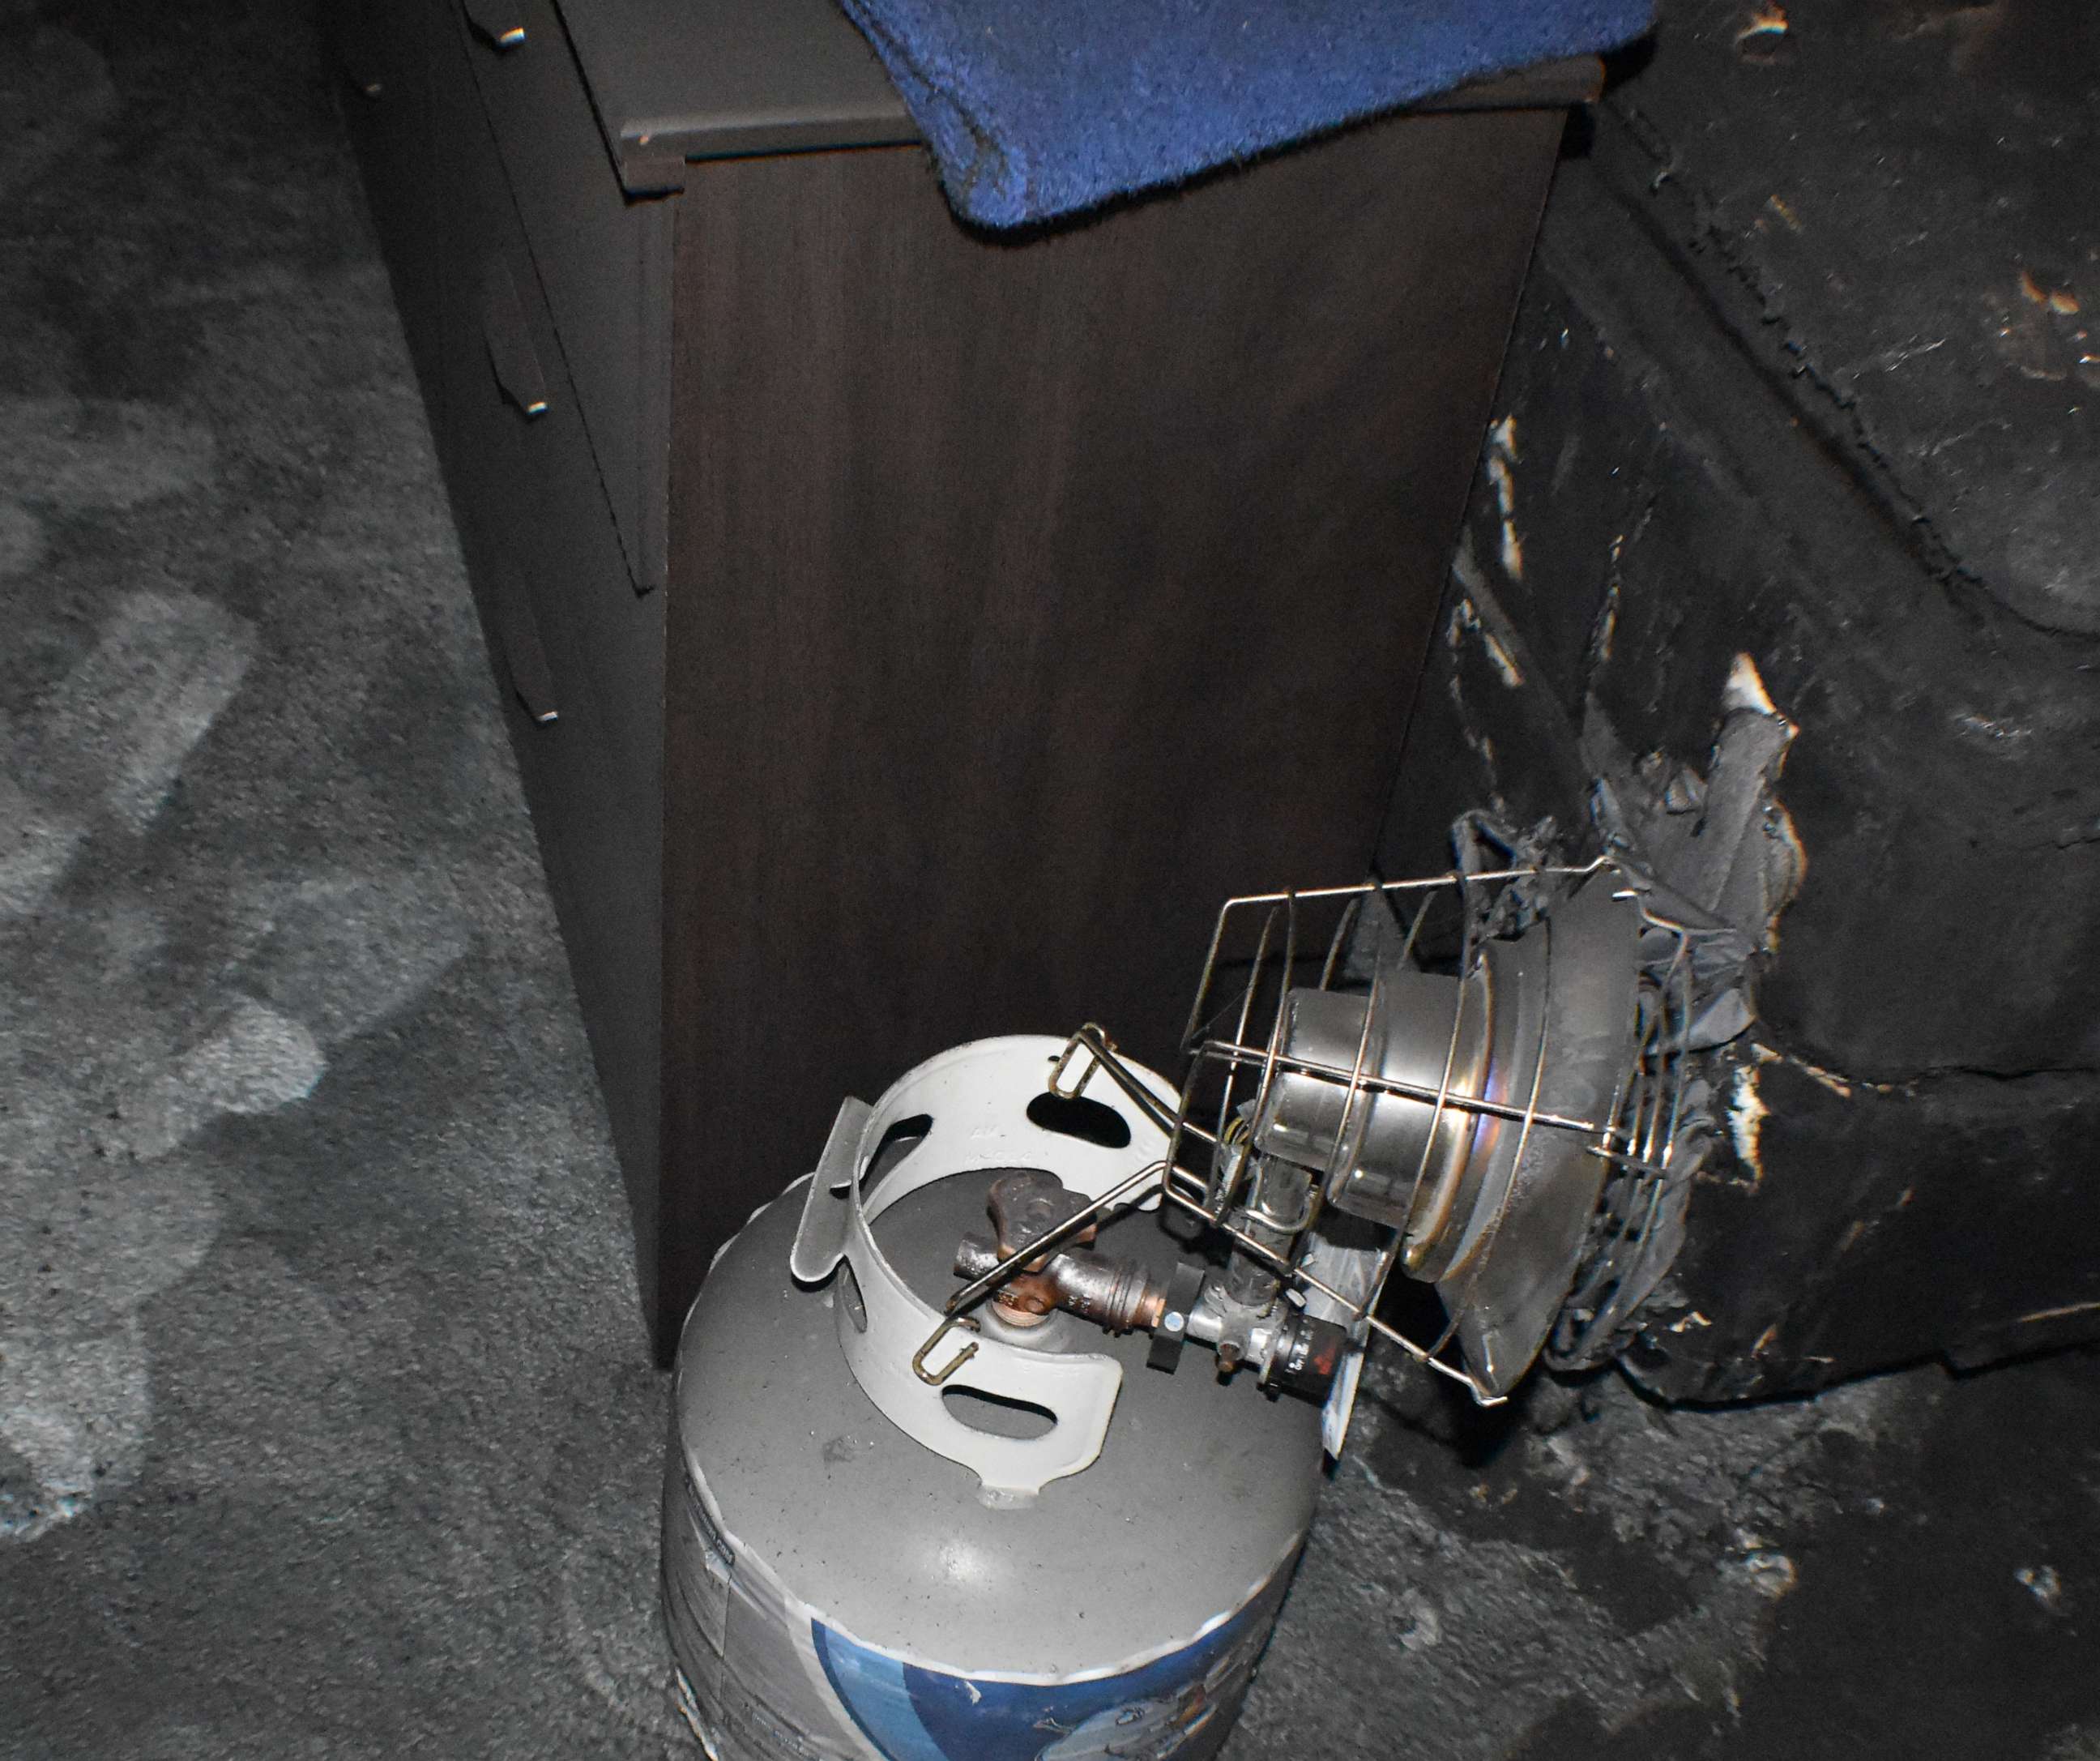 PHOTO: The position of the propane heater found in the Entzel home.